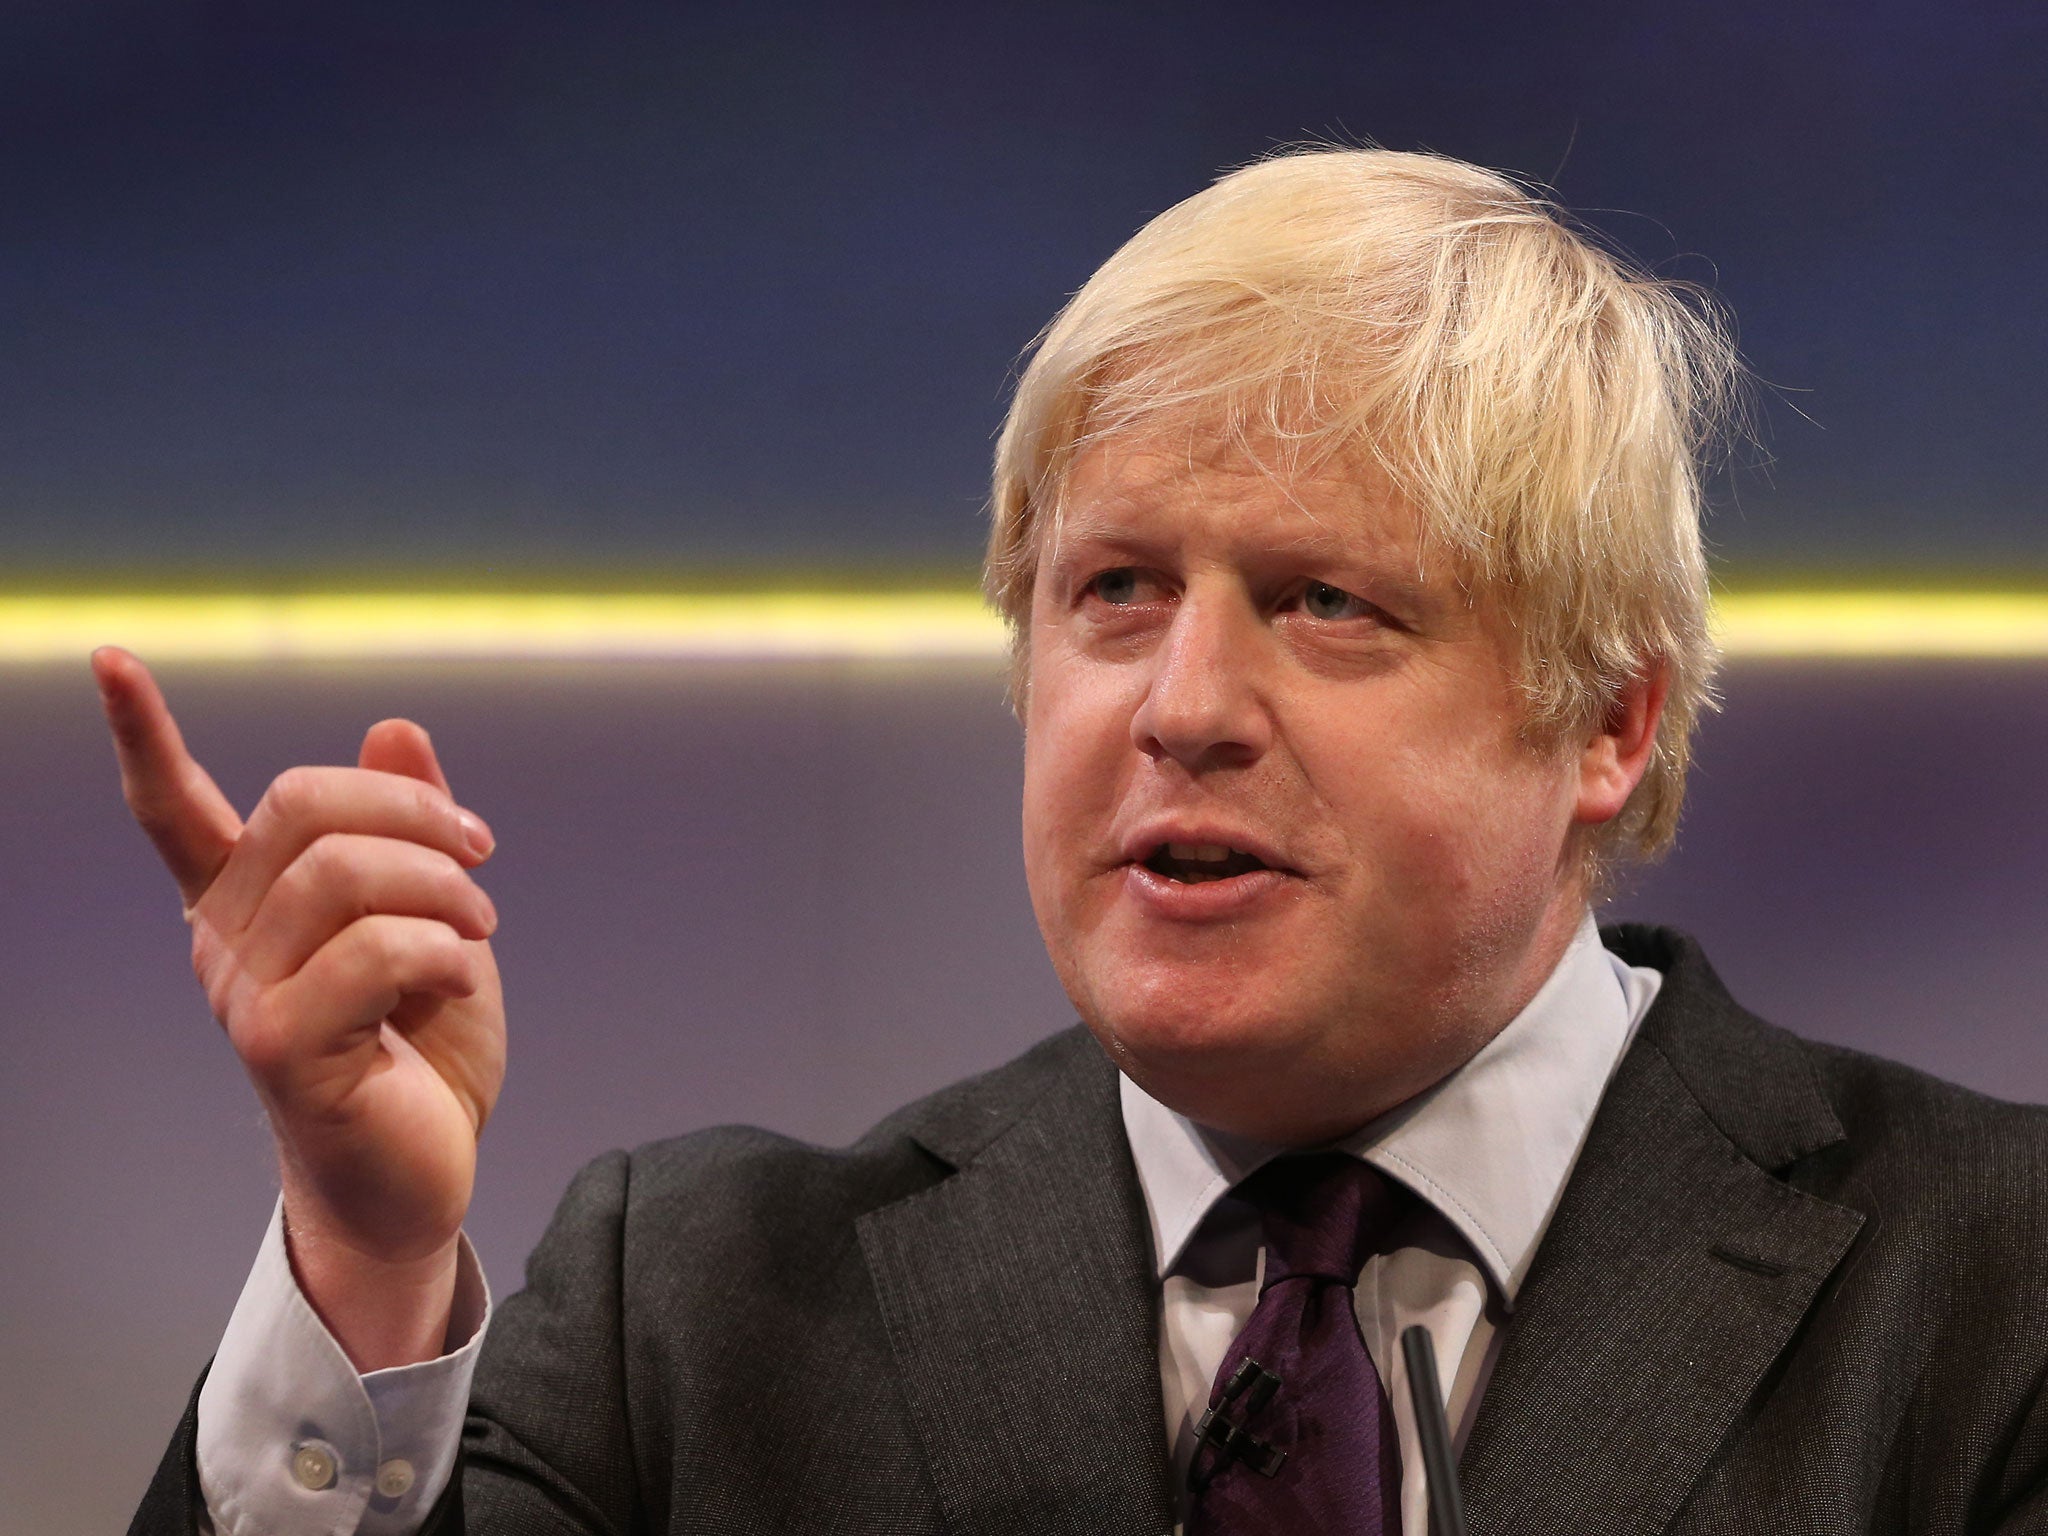 London Mayor Boris Johnson is a former pupil of Ashdown House Preparatory School in Forest Row, East Sussex